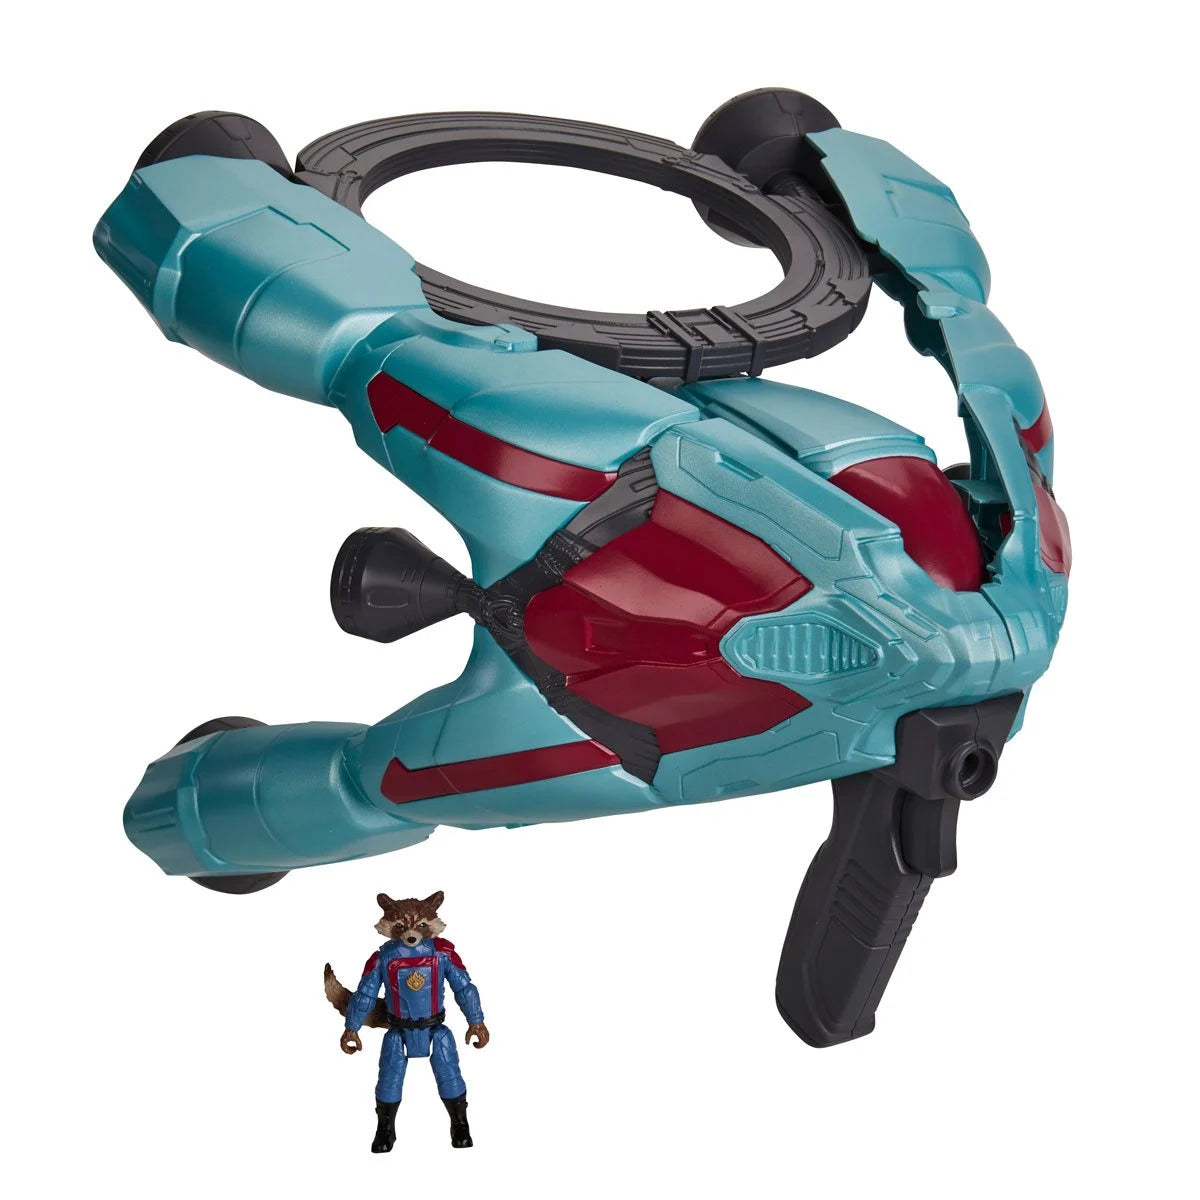 Marvel Guardians of The Galaxy Vol. 3 Galactic Spaceship, Marvel’s Rocket Action Figure with Vehicle and Blaster - Heretoserveyou